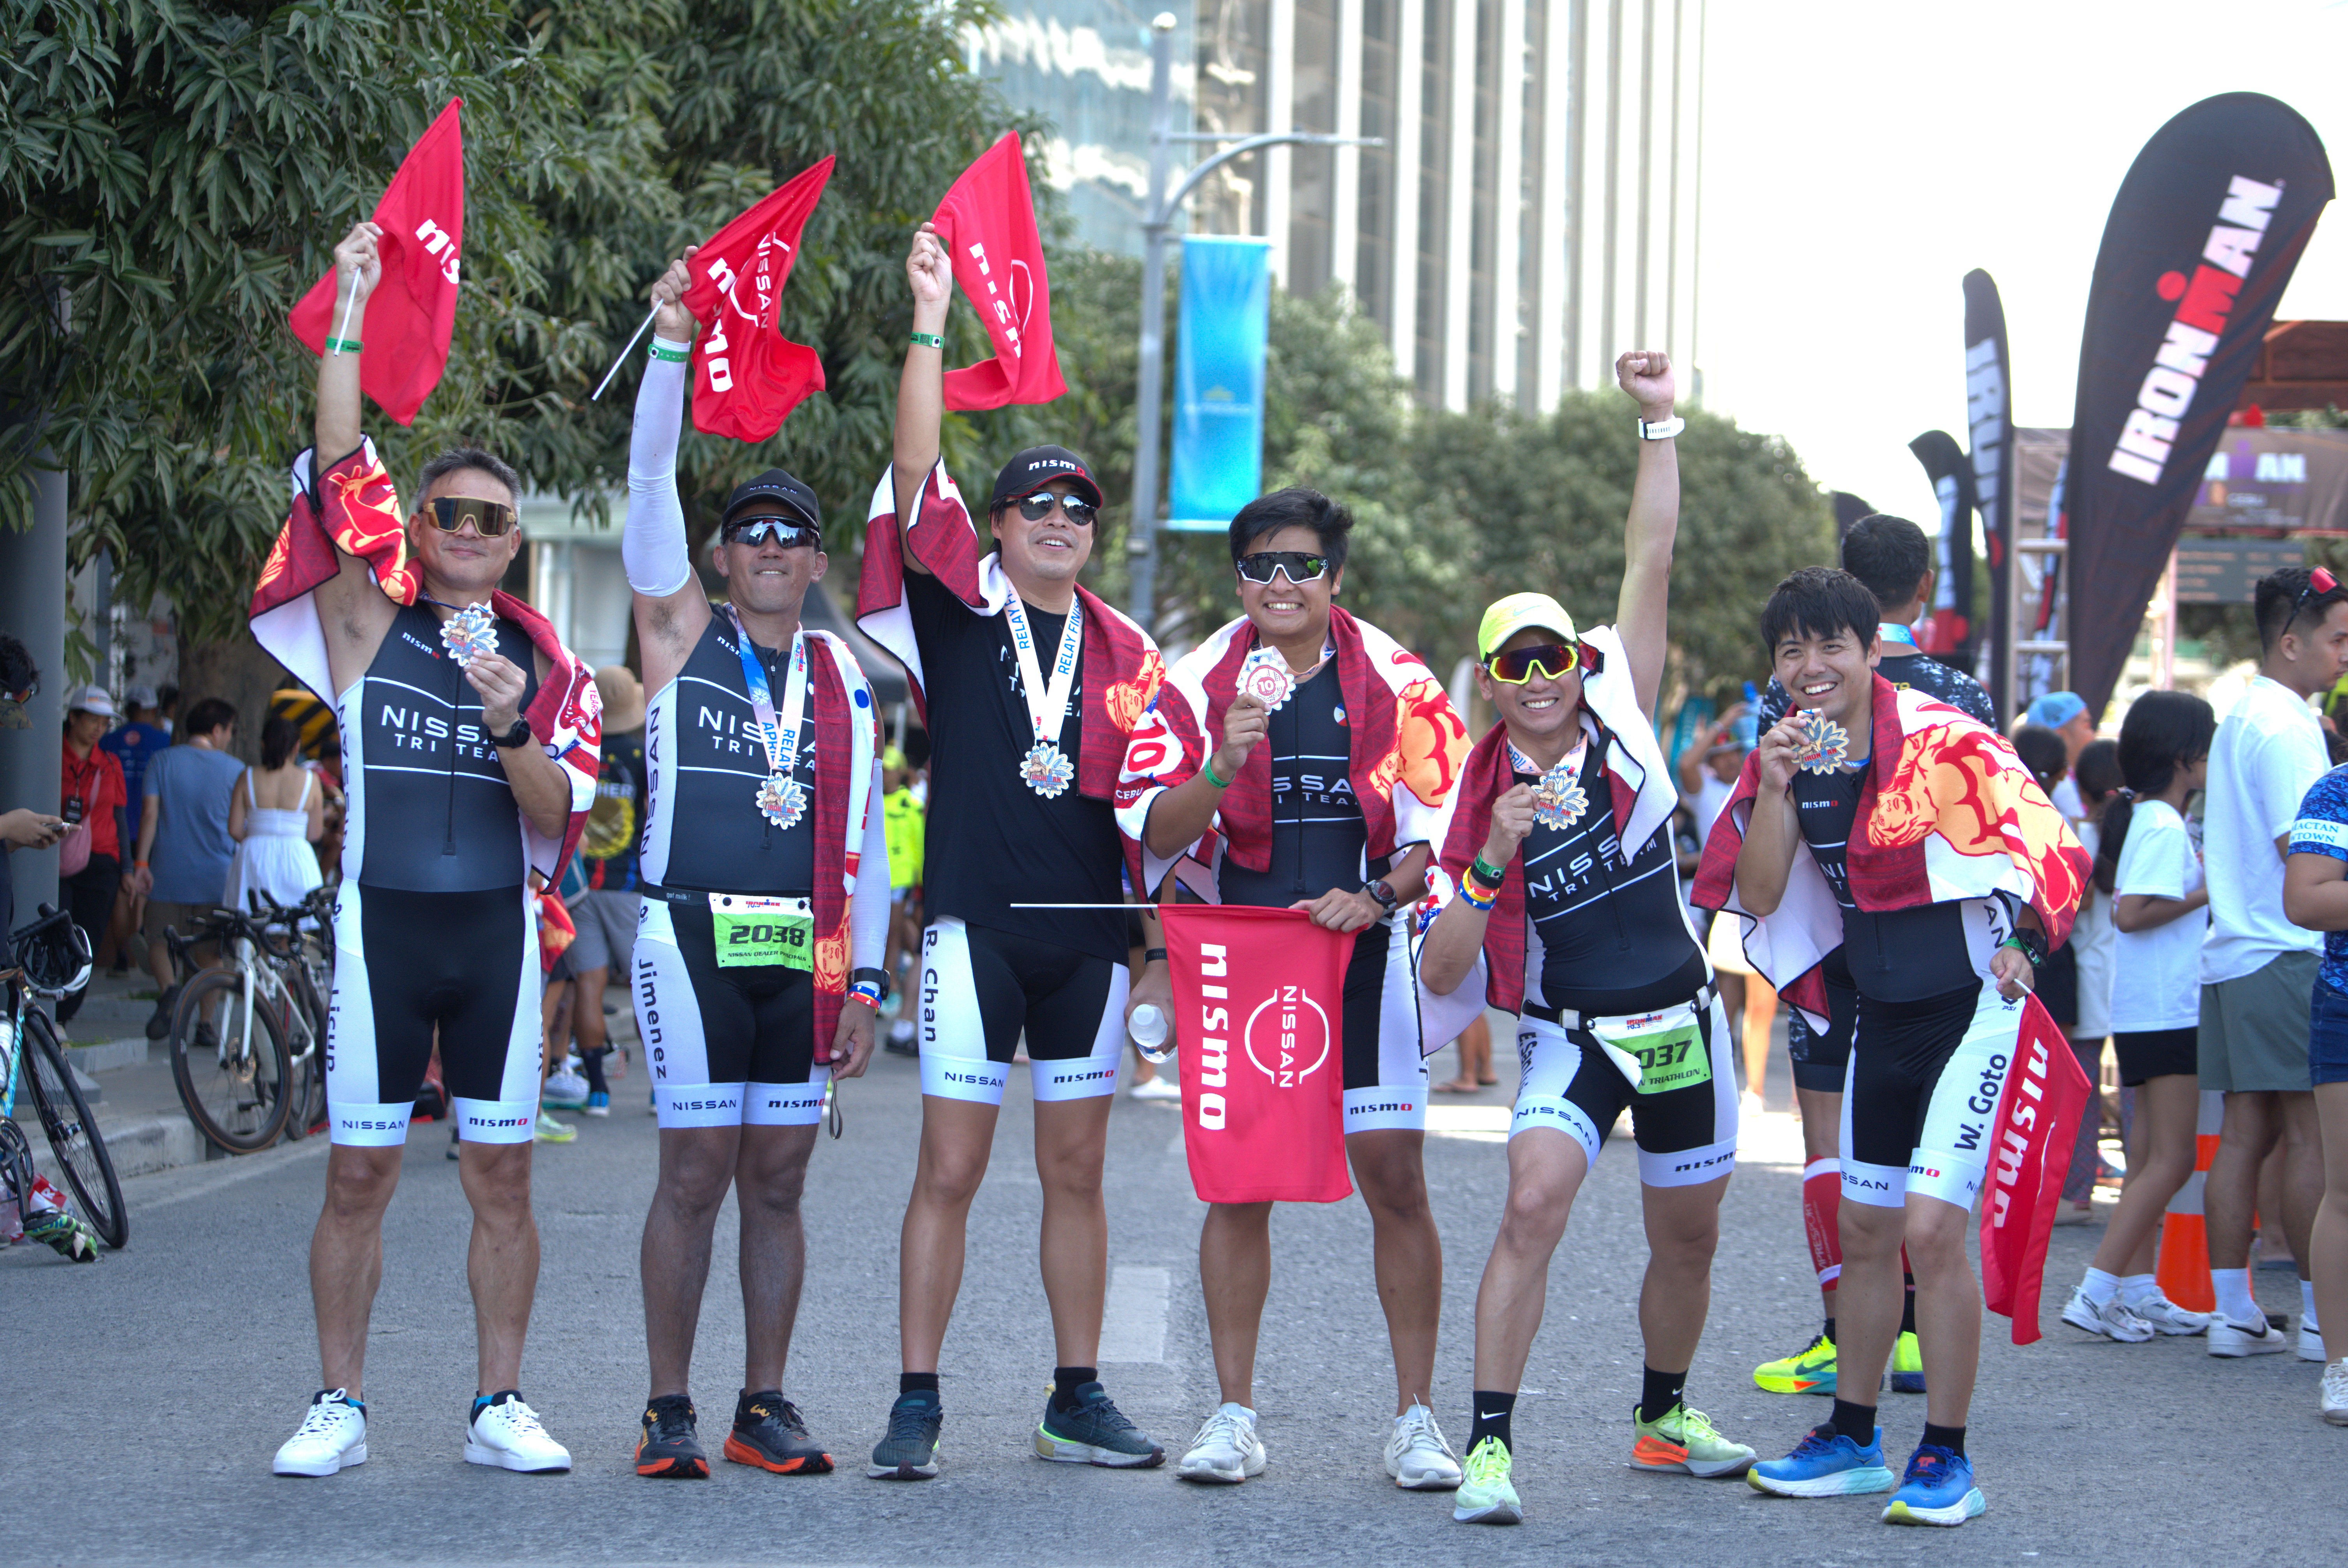 The Nissan Dealer Principals and Employee groups after completing the race